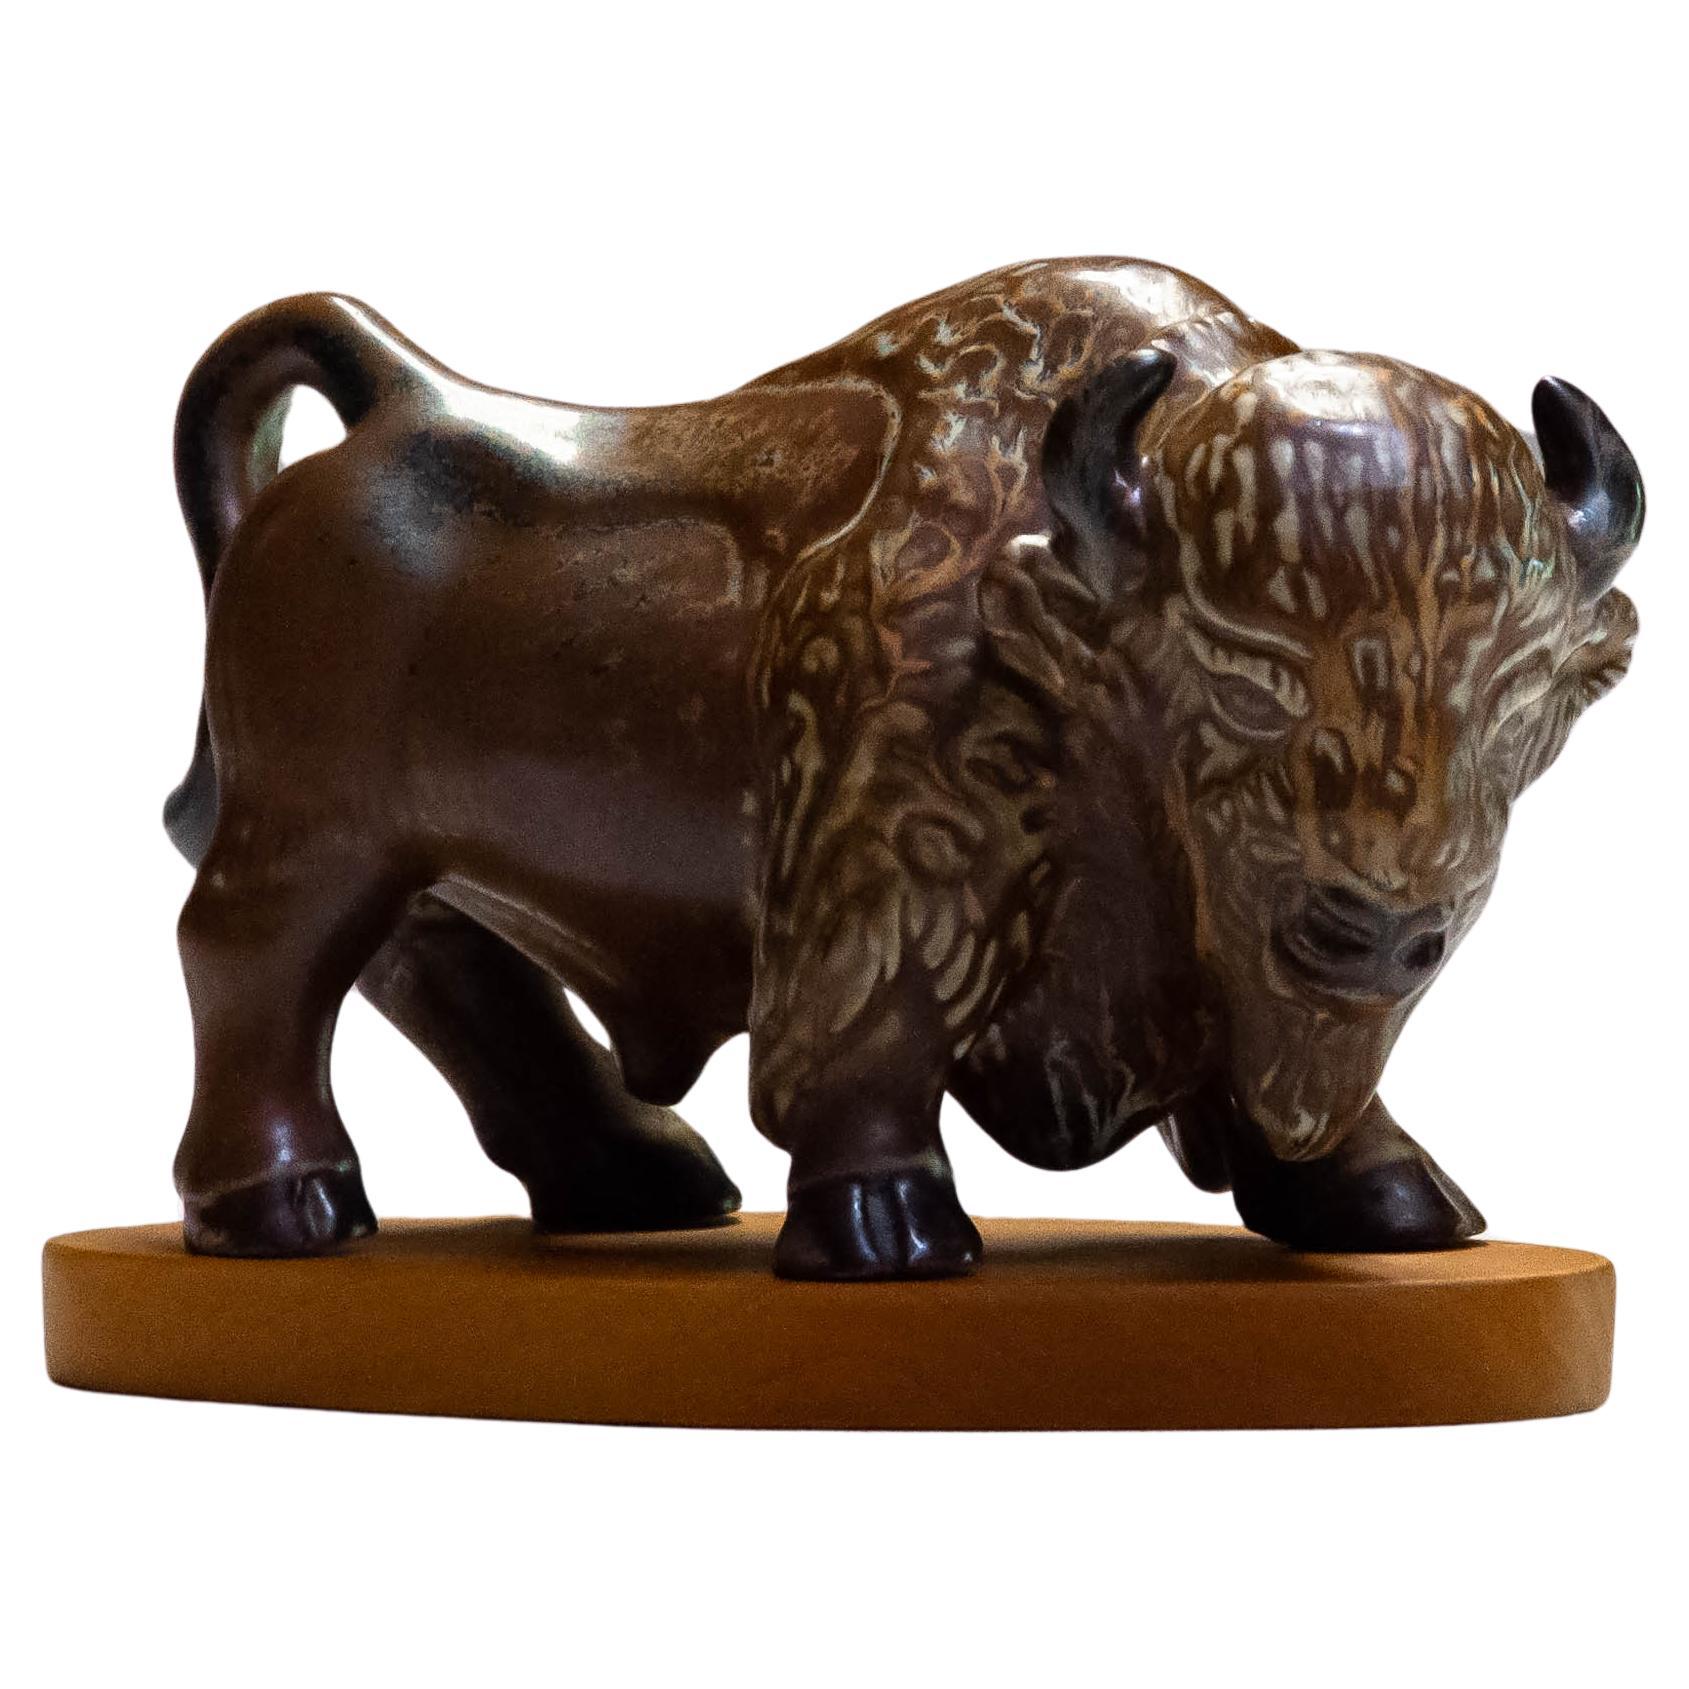 1960s Stoneware / Chamotte Brown Brutalist Bull By Gunnar Nylund For Rörstrand  For Sale